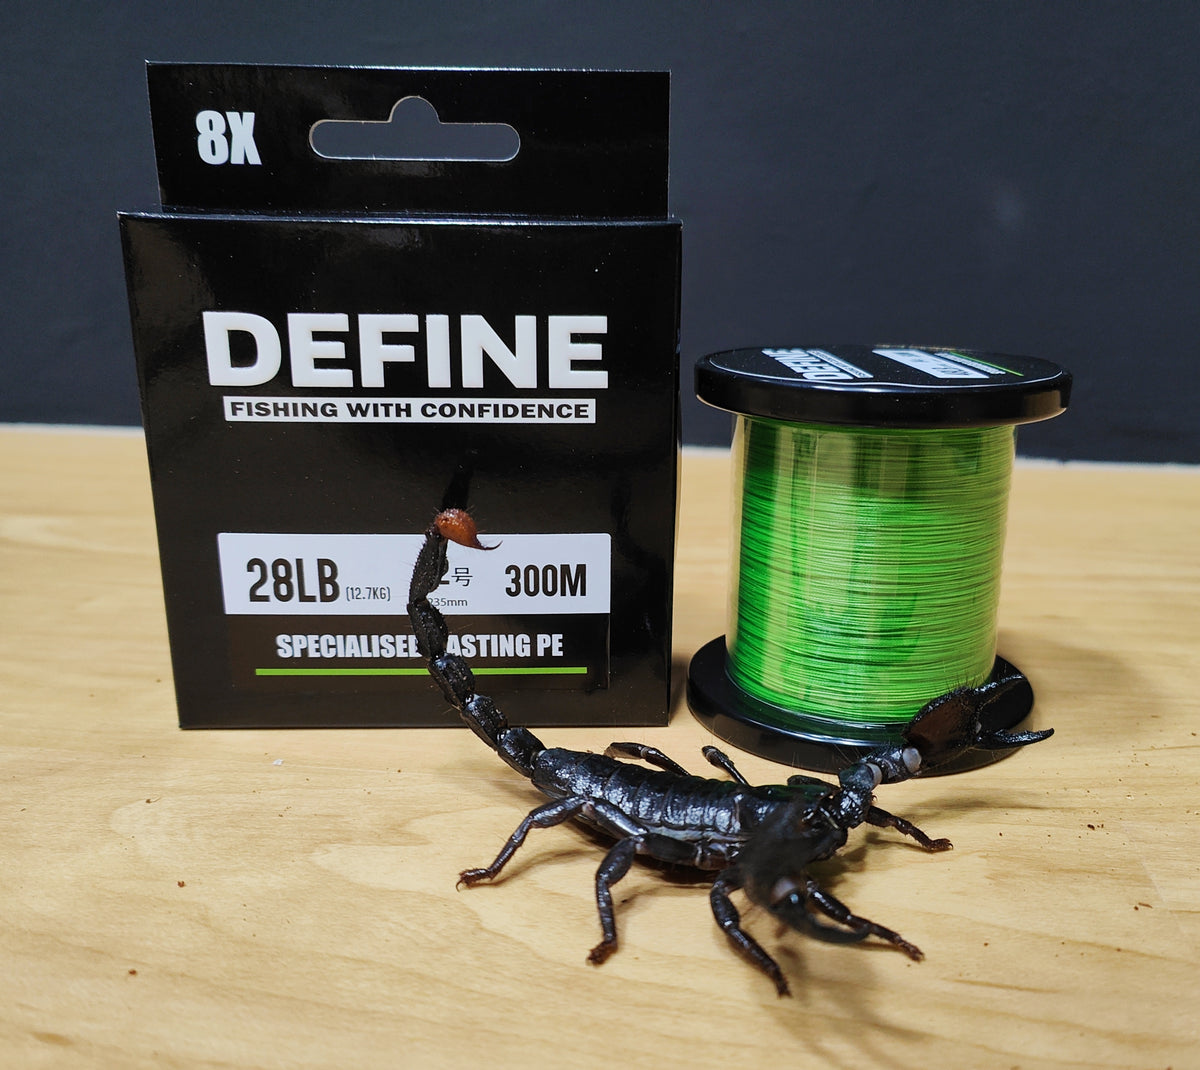 DEFINE SPECIALISED CASTING PE LINE X8 (BRAID FISHING LINE) (300M) –  REDTACKLE